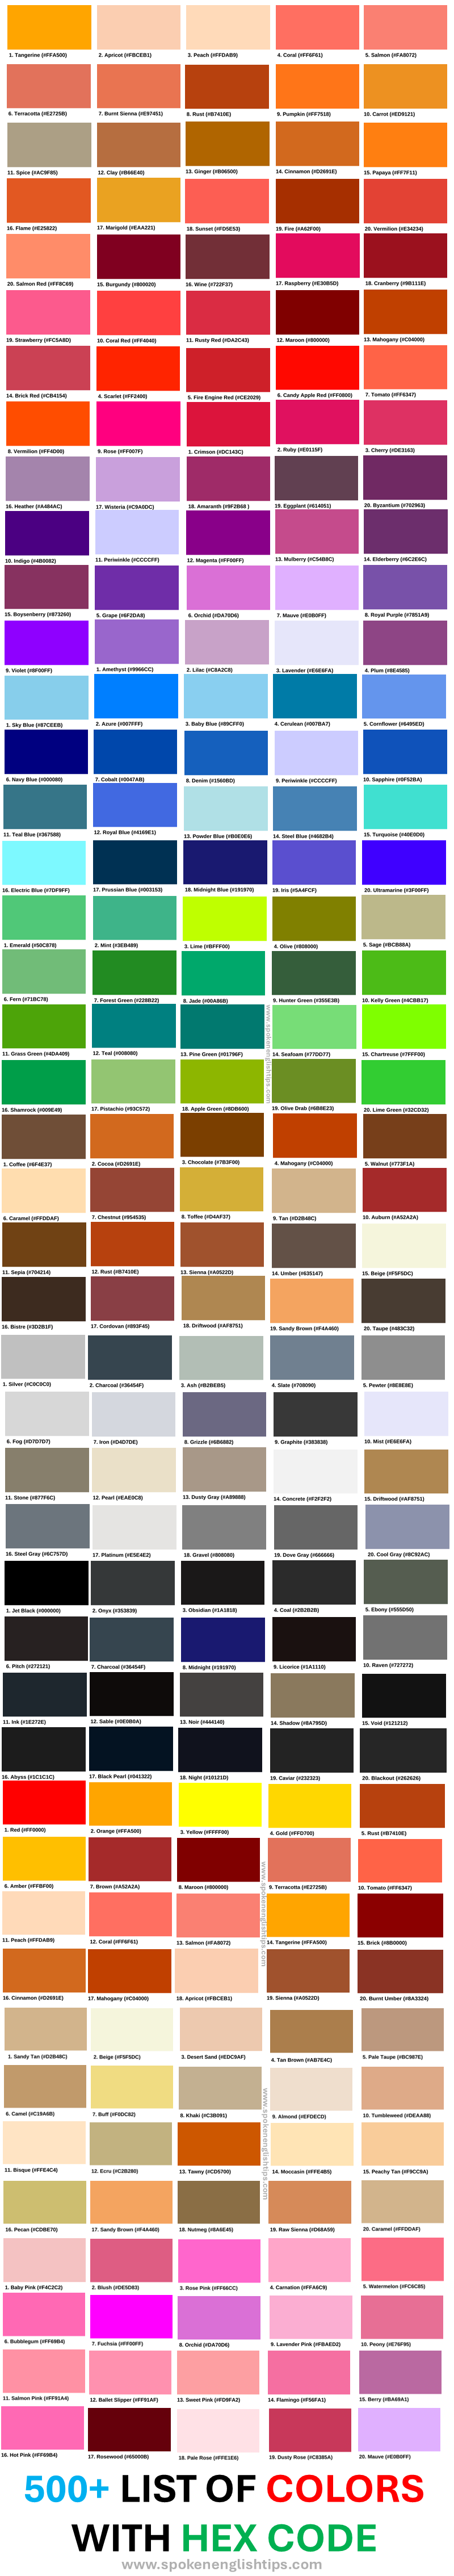 List of Colors: 500+ Name of Colors with Hex Codes